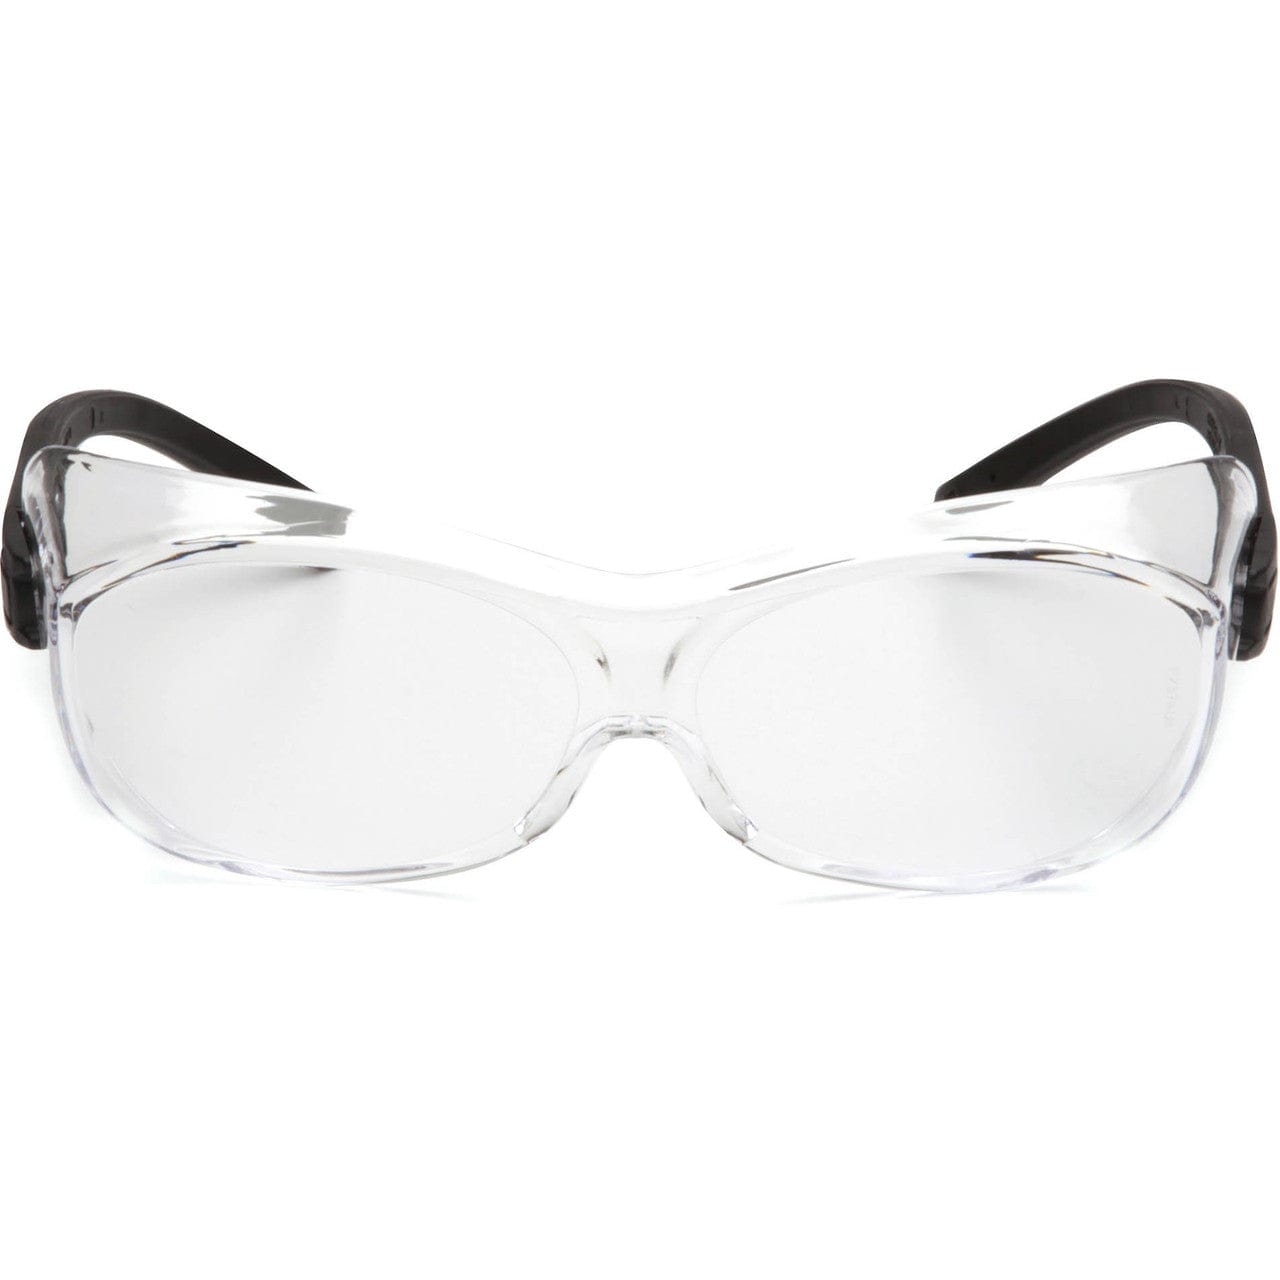 Pyramex OTS Over-The-Glass Safety Glasses with Clear Lens